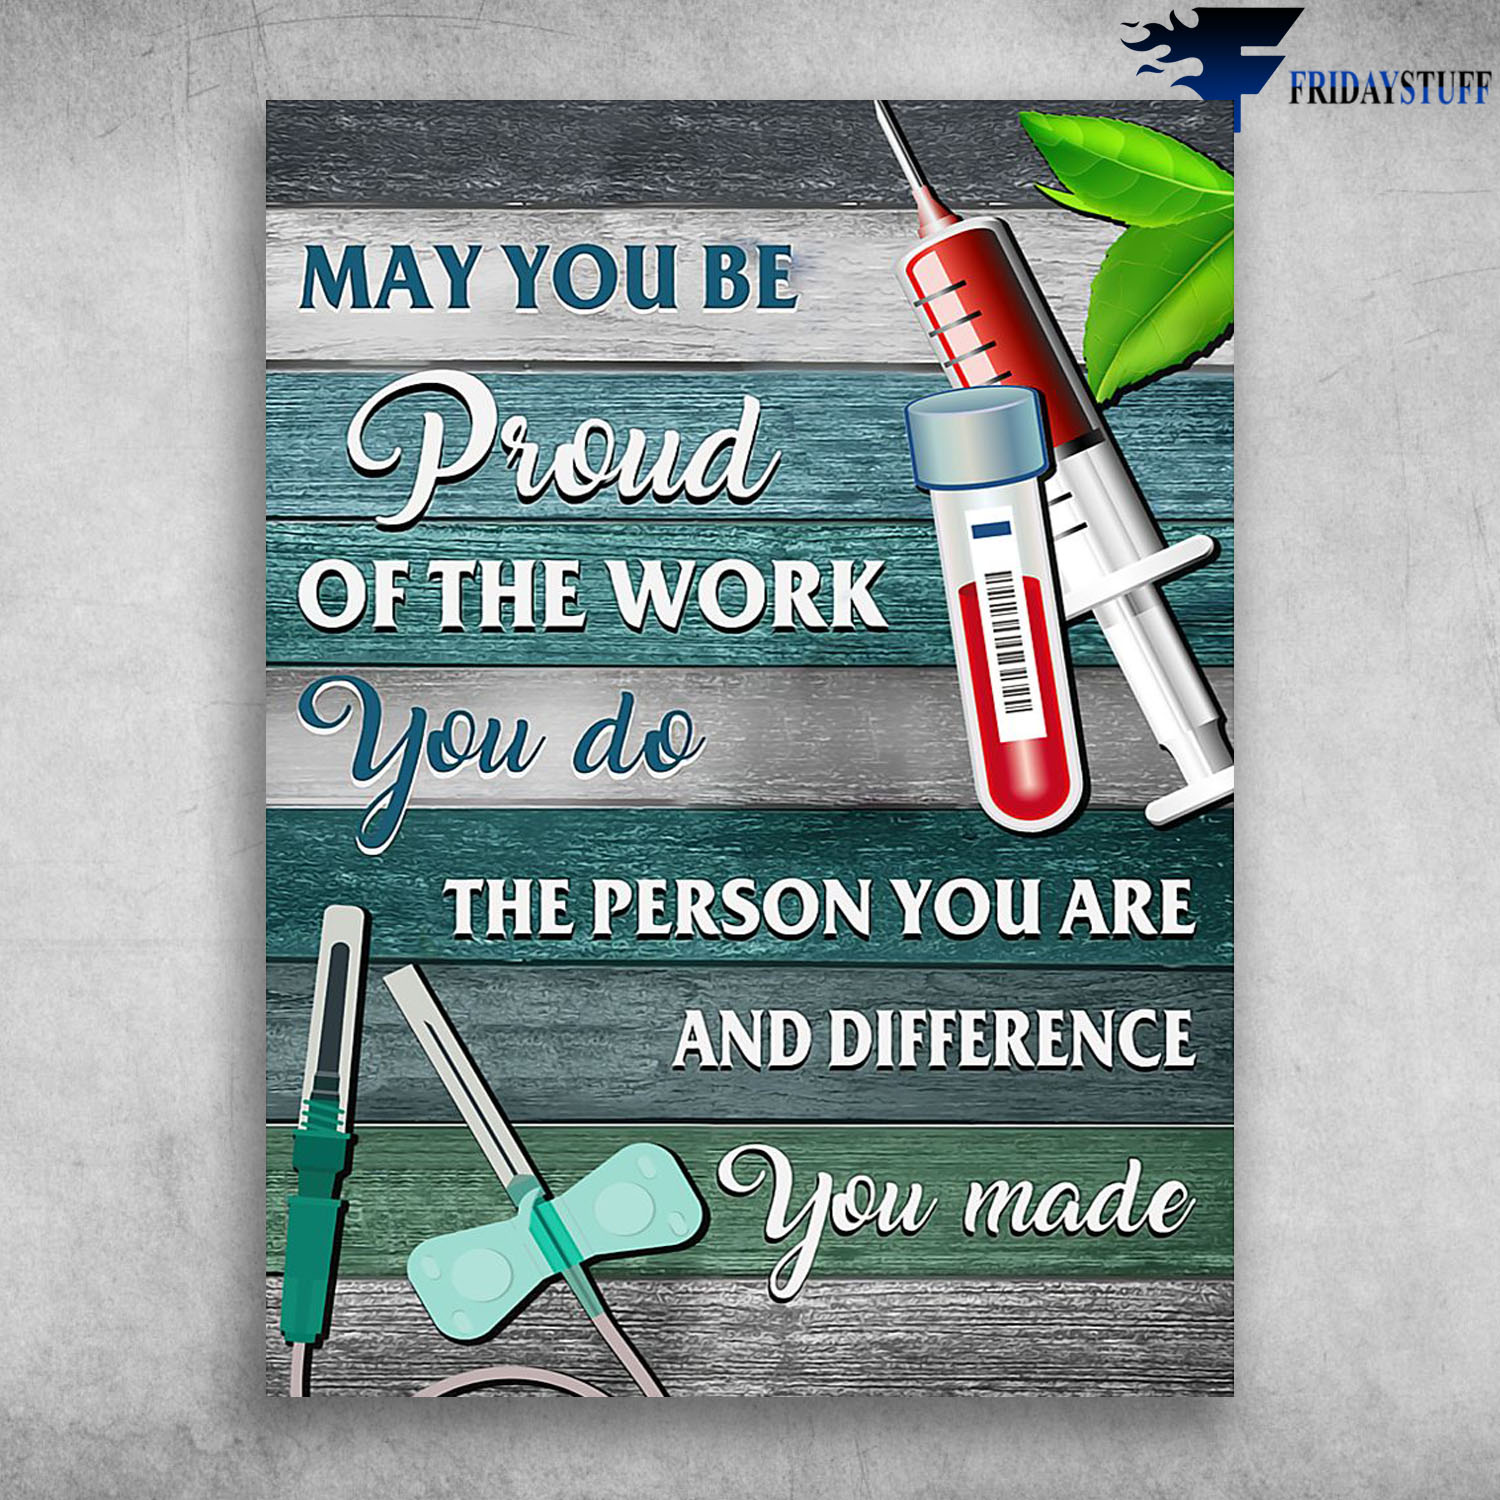 Medical Tools May You Be Proud Of The Work You Do The Person You Are And Difference You Made